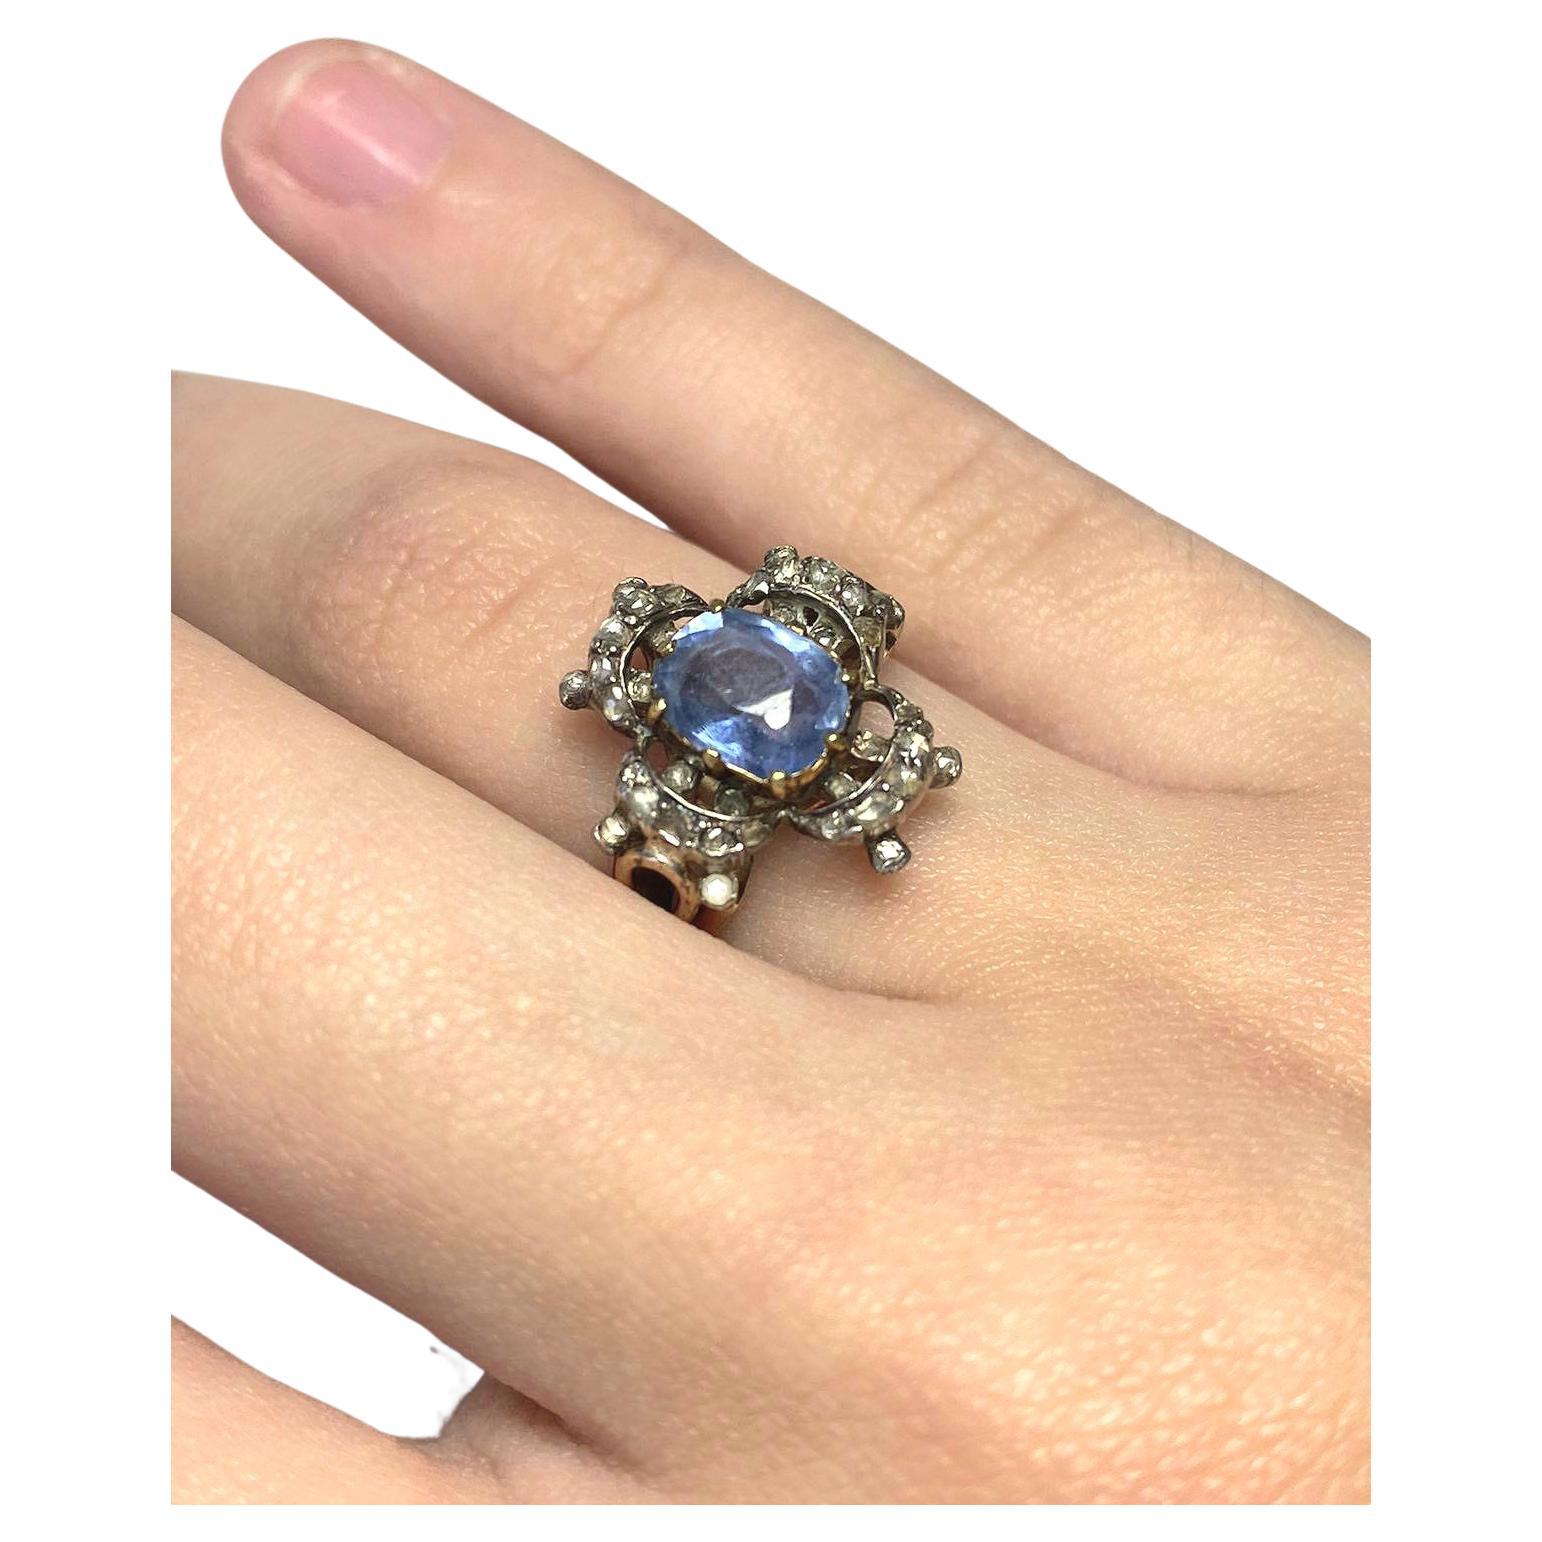 Antique ring in artnovo style centered with violet blue sapphire colour diameter of 6.60mm×6mm in 14k gold setting topped with silver artnovo designe prongs with rose cut diamonds ring dates back to europe early 19th century 